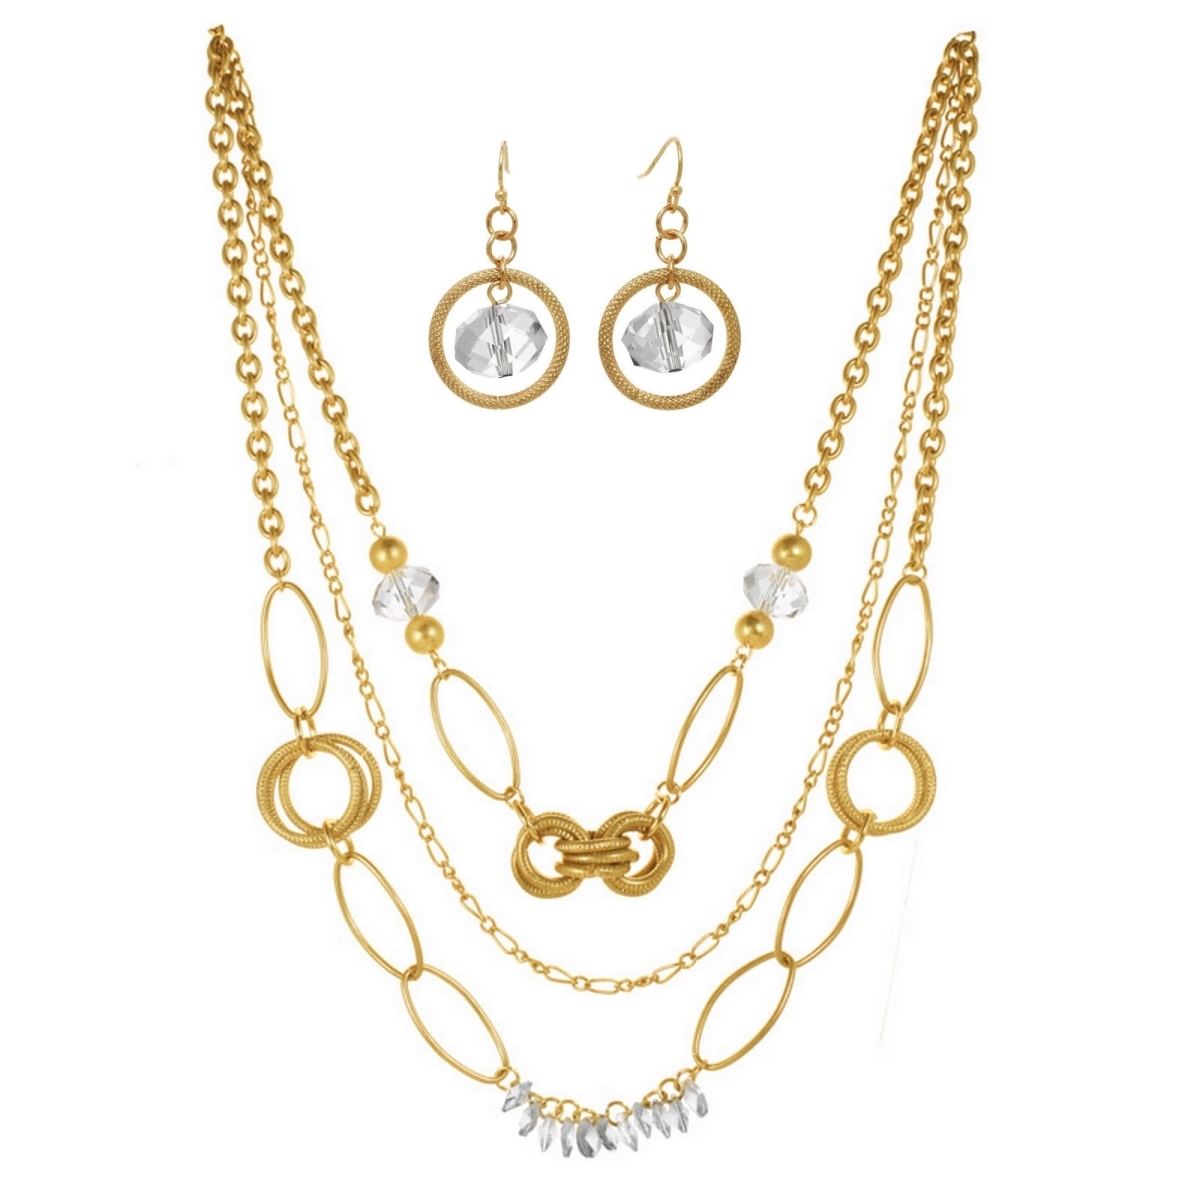 Picture of J&H Designs JHN9085 J&H Designs Crystal and Goldtone Hoop Three-strand Necklace and Earrings Jewelry Set